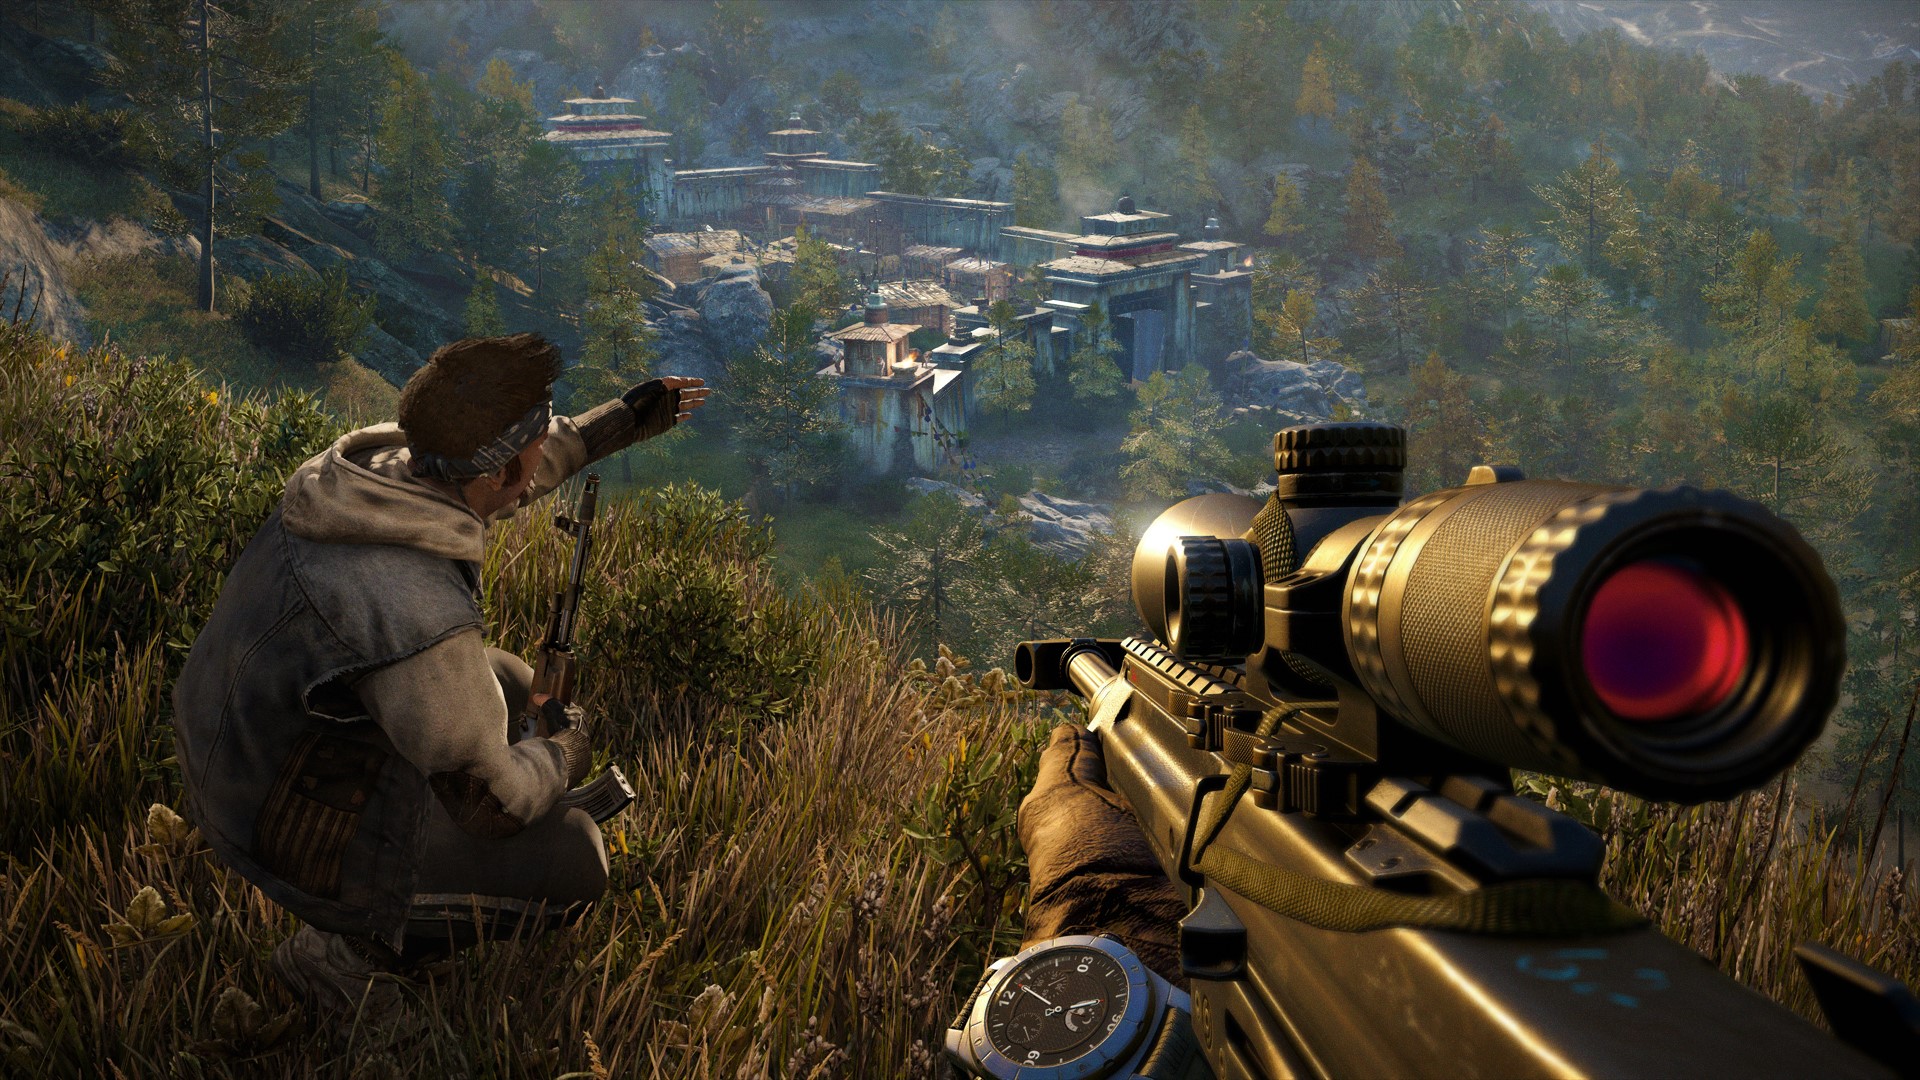 More Than 1000 Wallpapers For Desktop Game - Farcry 4 - HD Wallpaper 